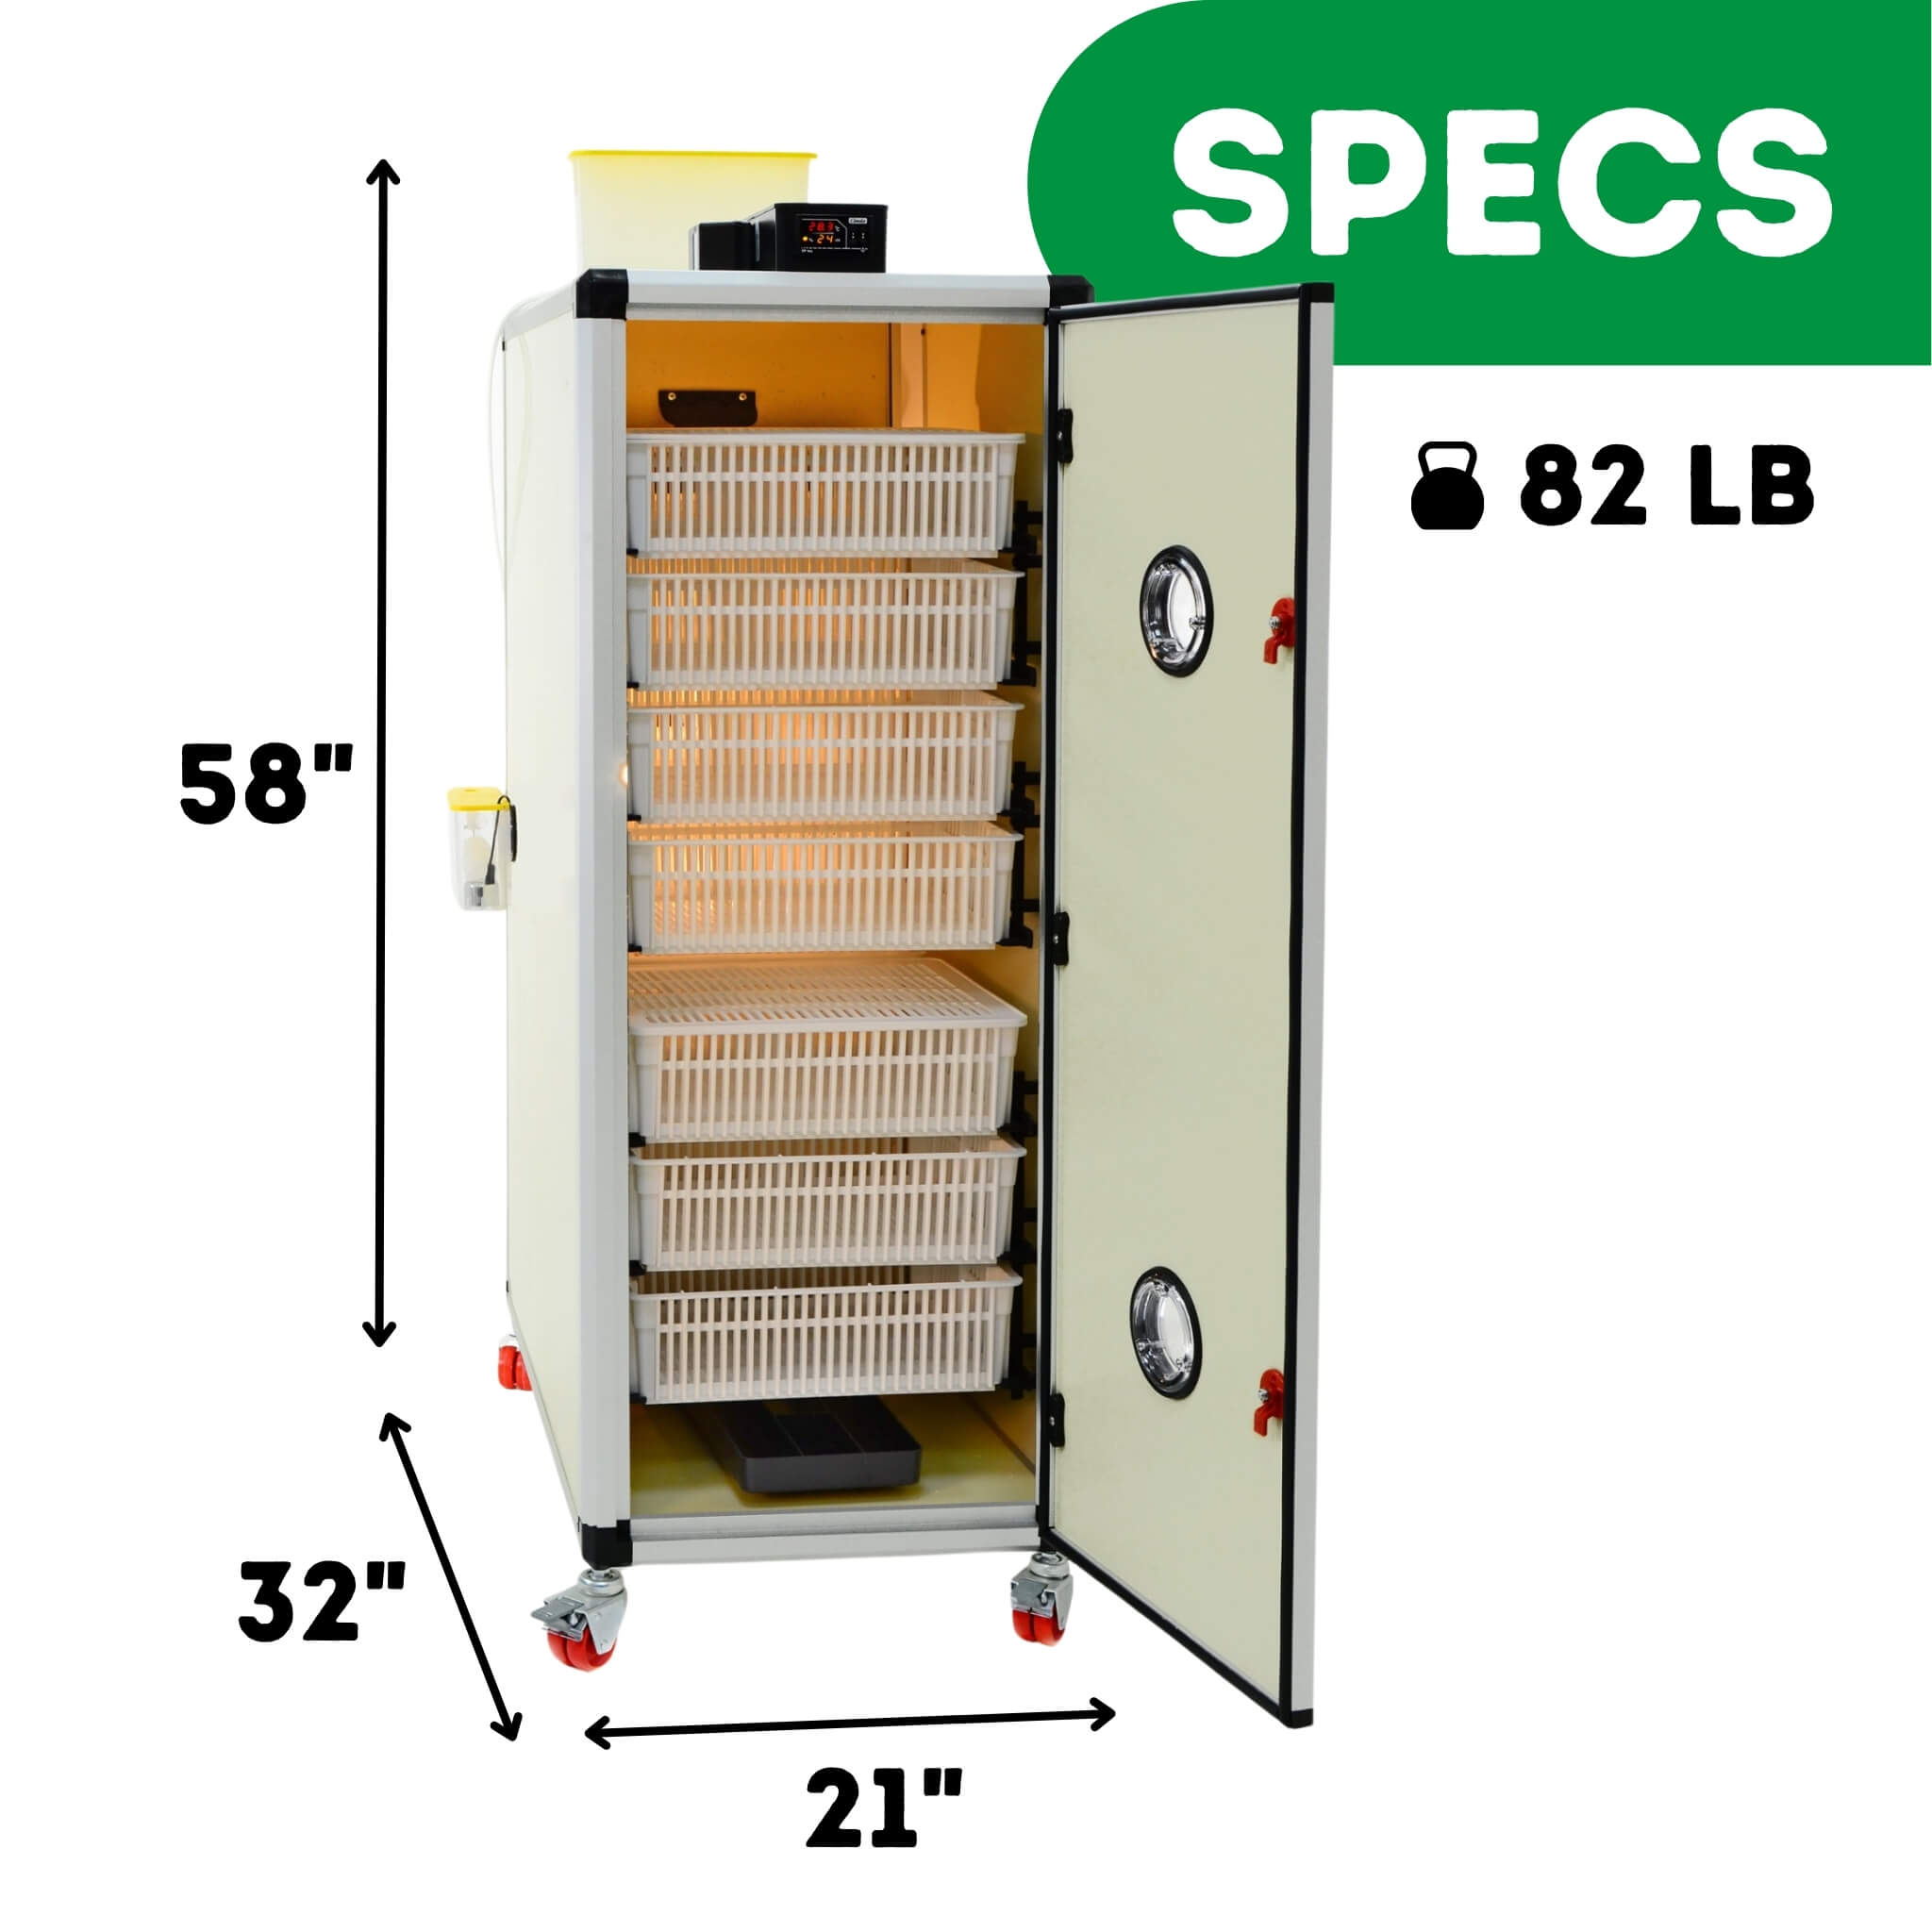 Hatching Time Cimuka. Key specifications of Cimuka HB500H egg incubator, detailing dimensions and weight, essential information for poultry equipment buyers.